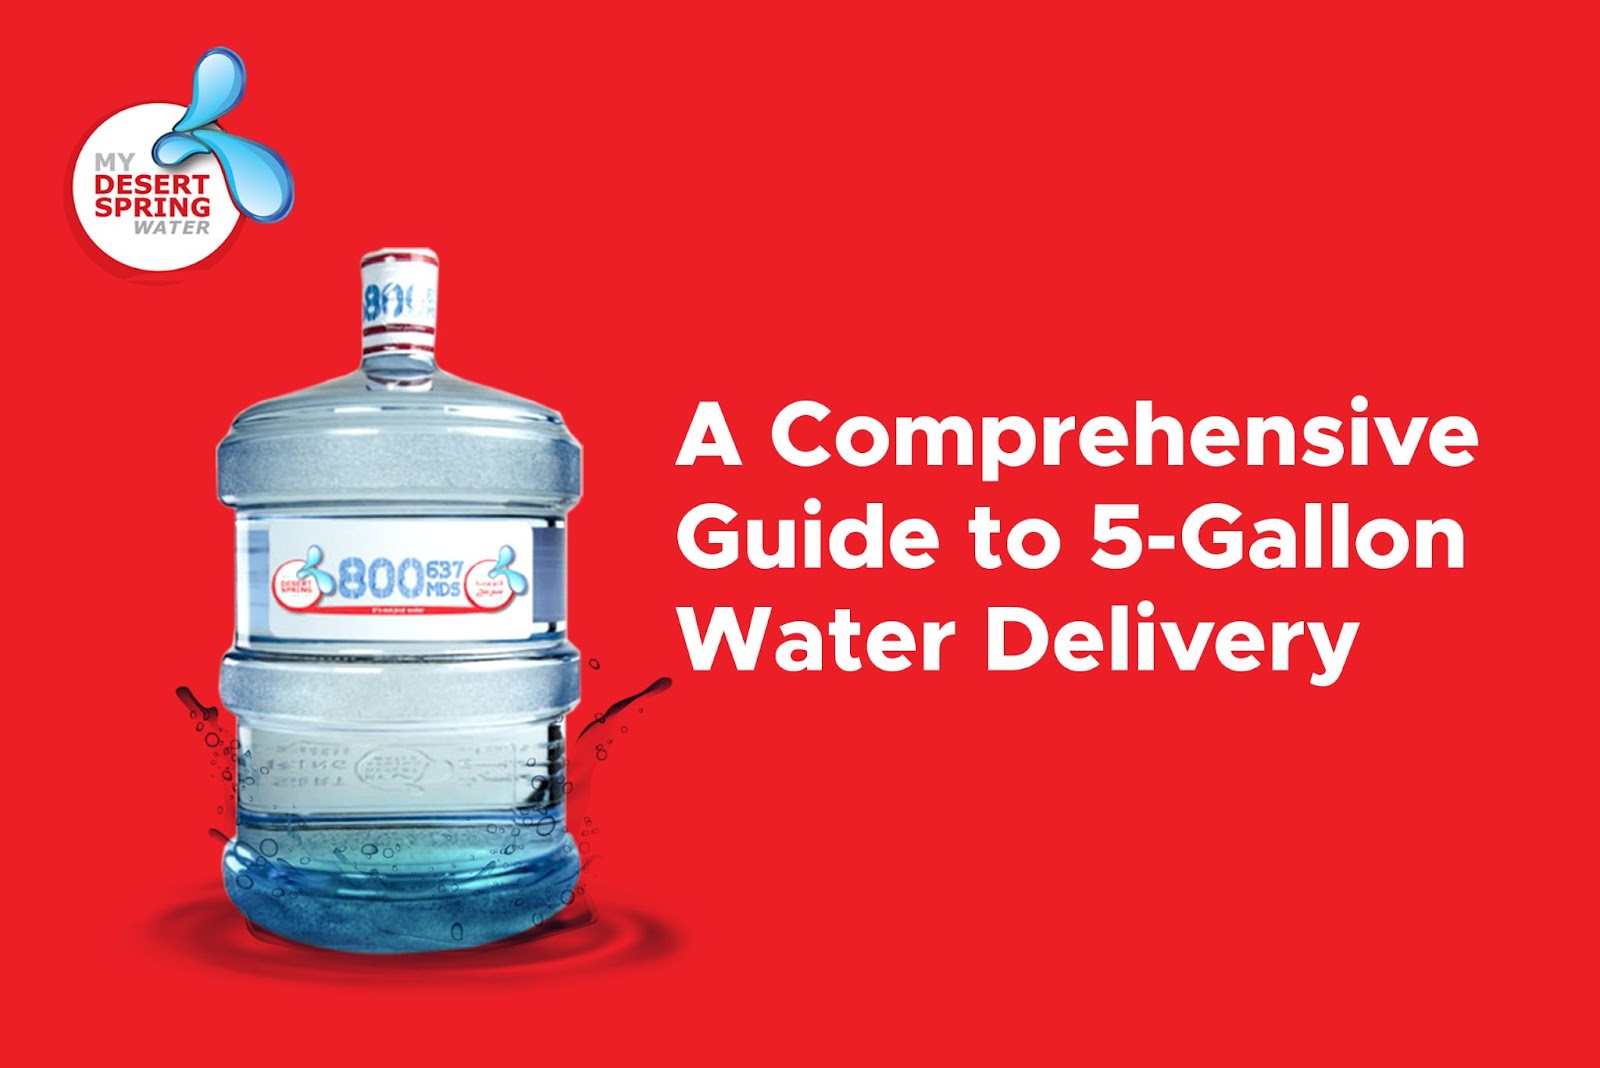 5-Gallon Water Delivery